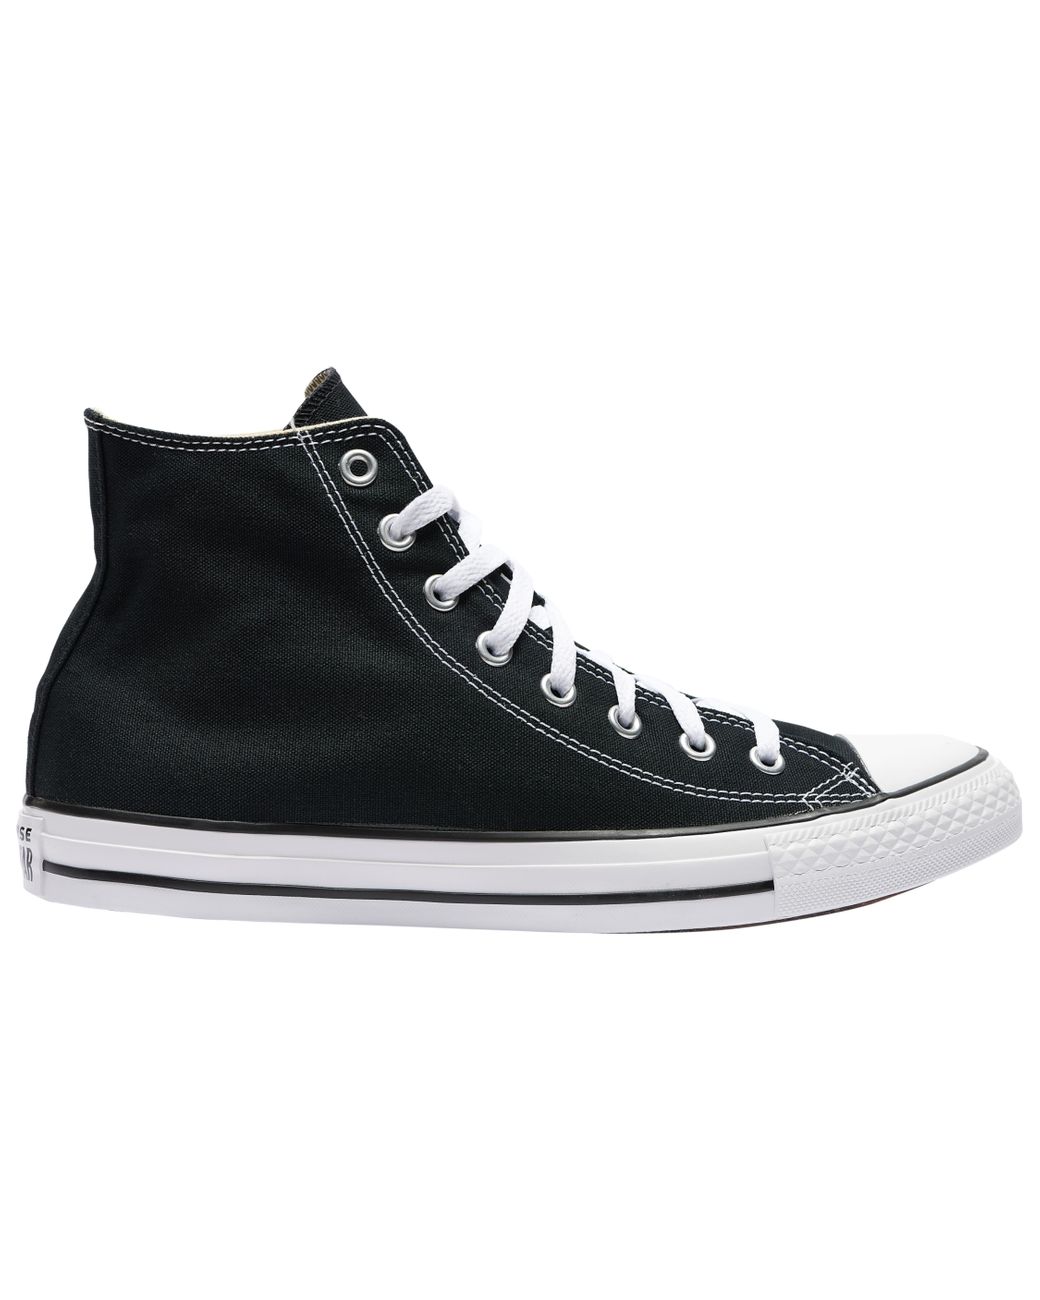 Converse Canvas All Star High Top - Basketball Shoes in Black/White ...